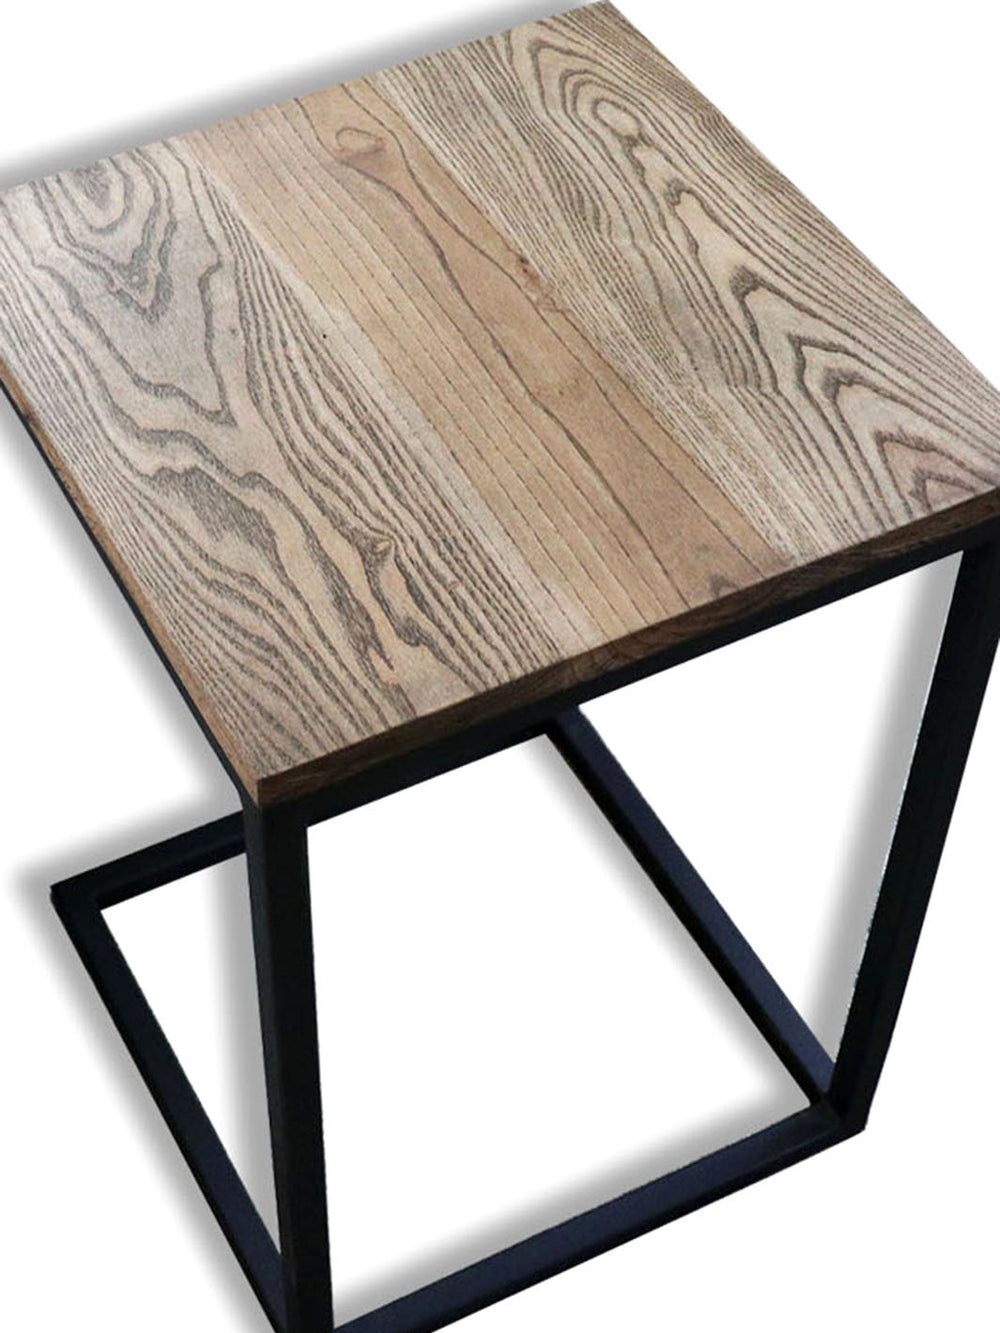 Square Black Stained Ash Square C Table (in stock) Earthly Comfort C table 1836-1